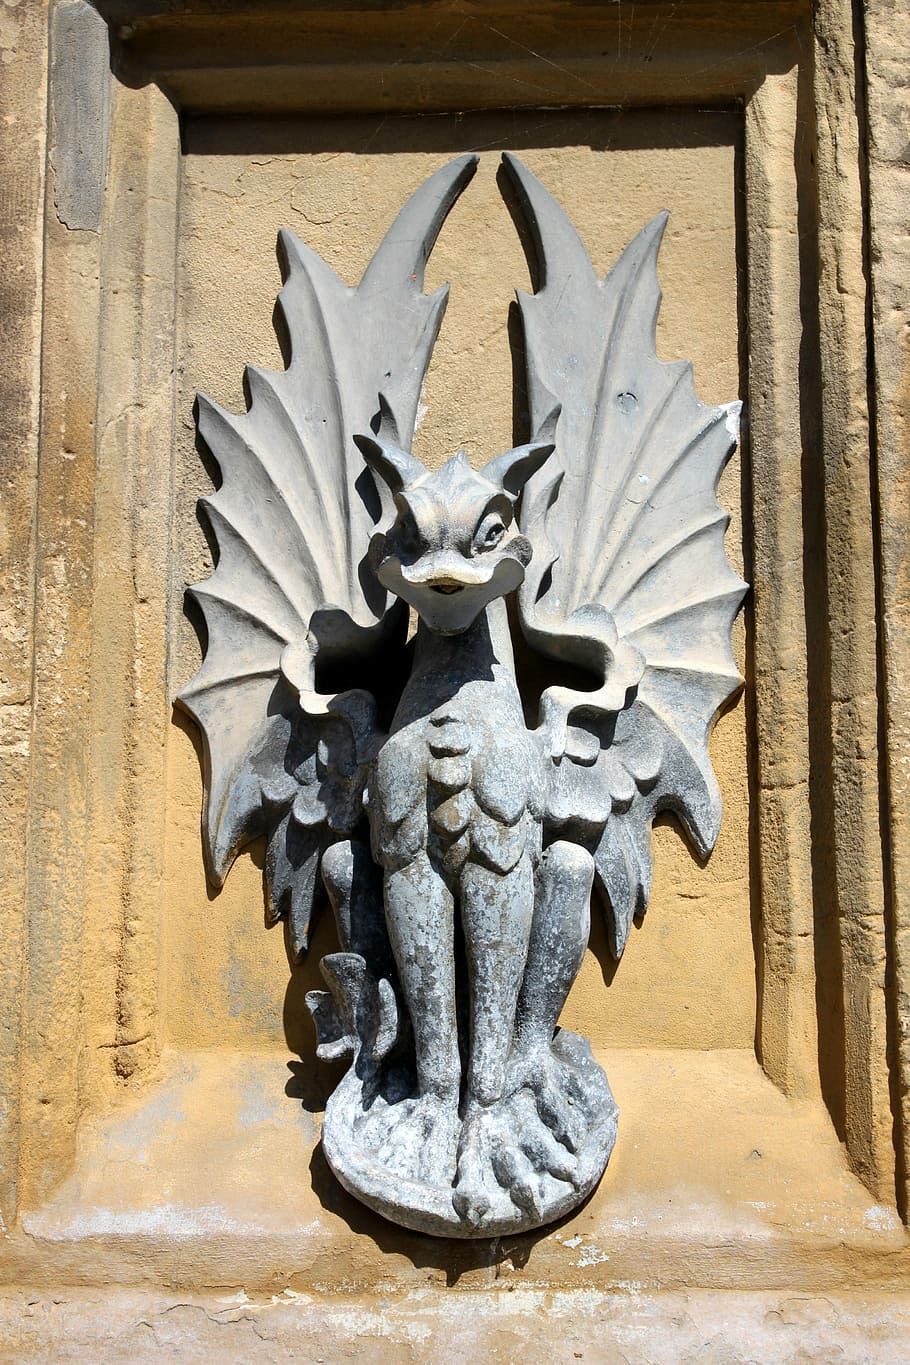 gray dragon statue, gargoyle, dragon fountain figure, water feature, creature, mythical, statue, mythical creatures, architecture, sculpture